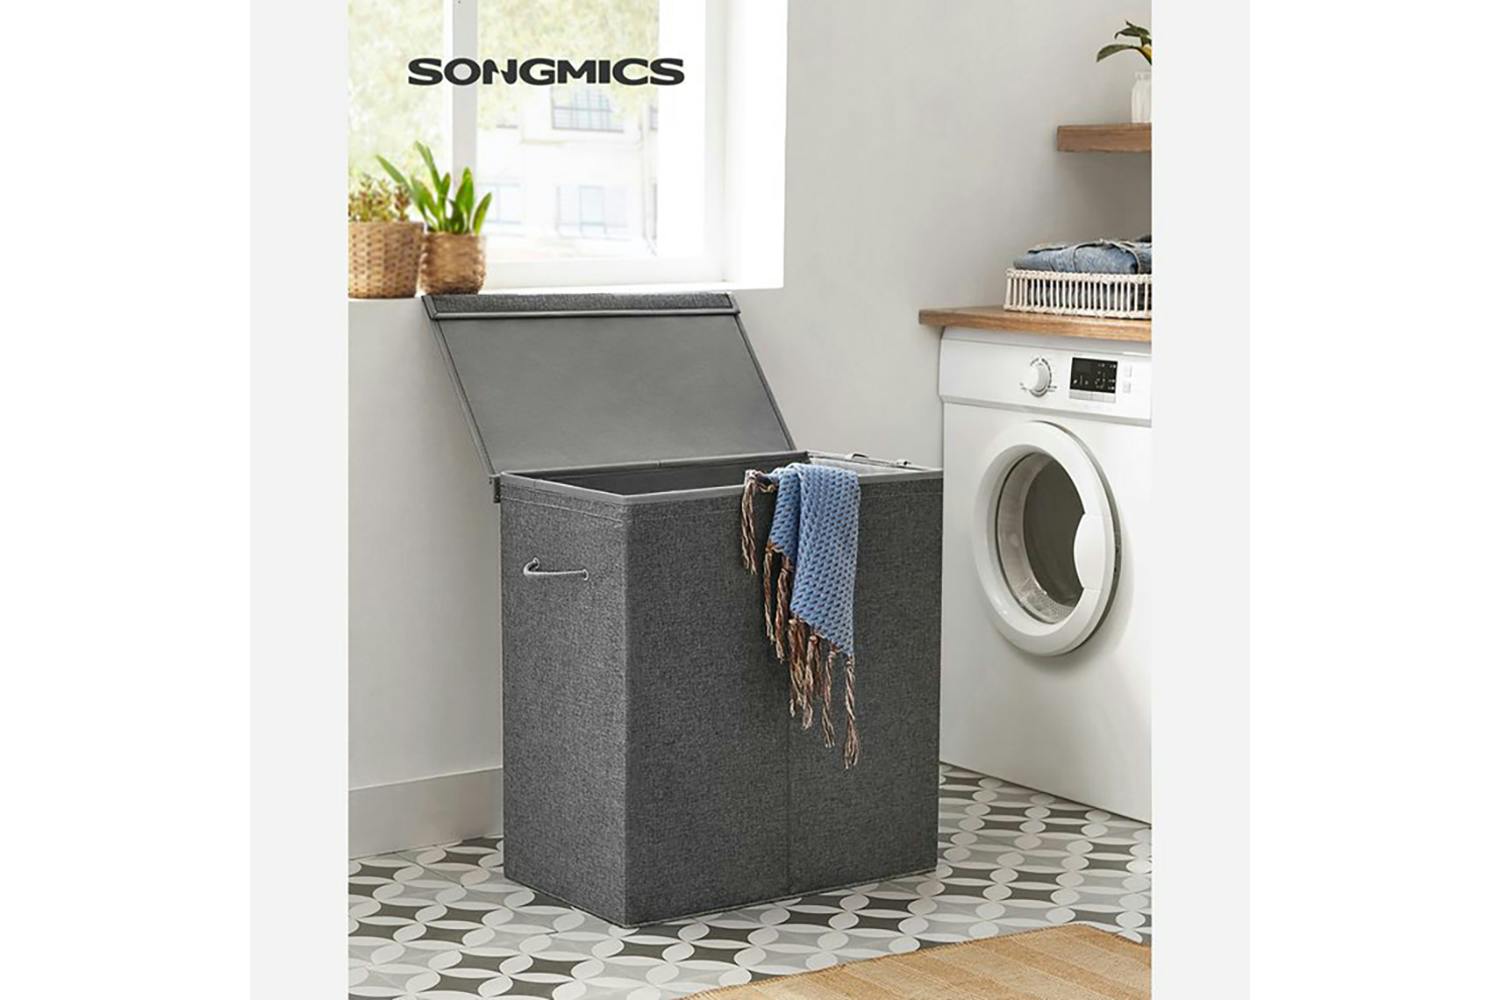 Songmics LCB002G02 Laundry Basket with 2 Compartments